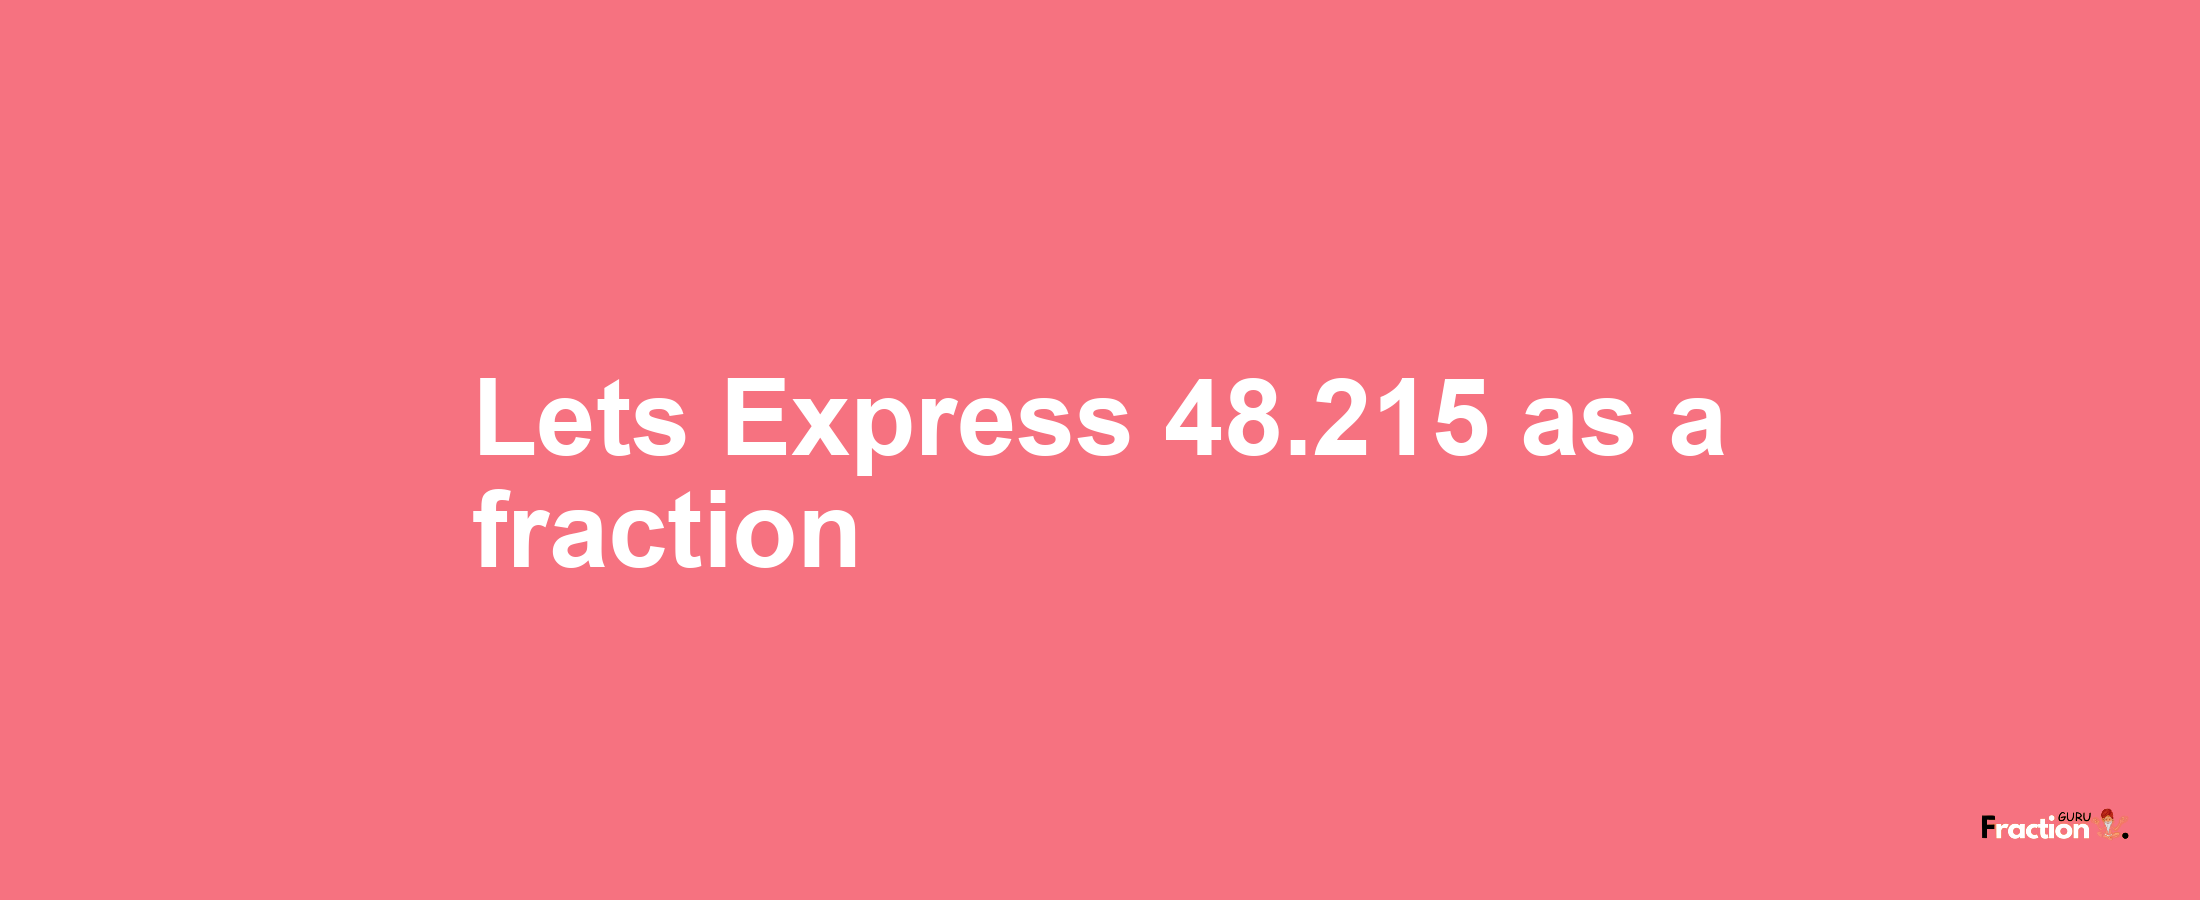 Lets Express 48.215 as afraction